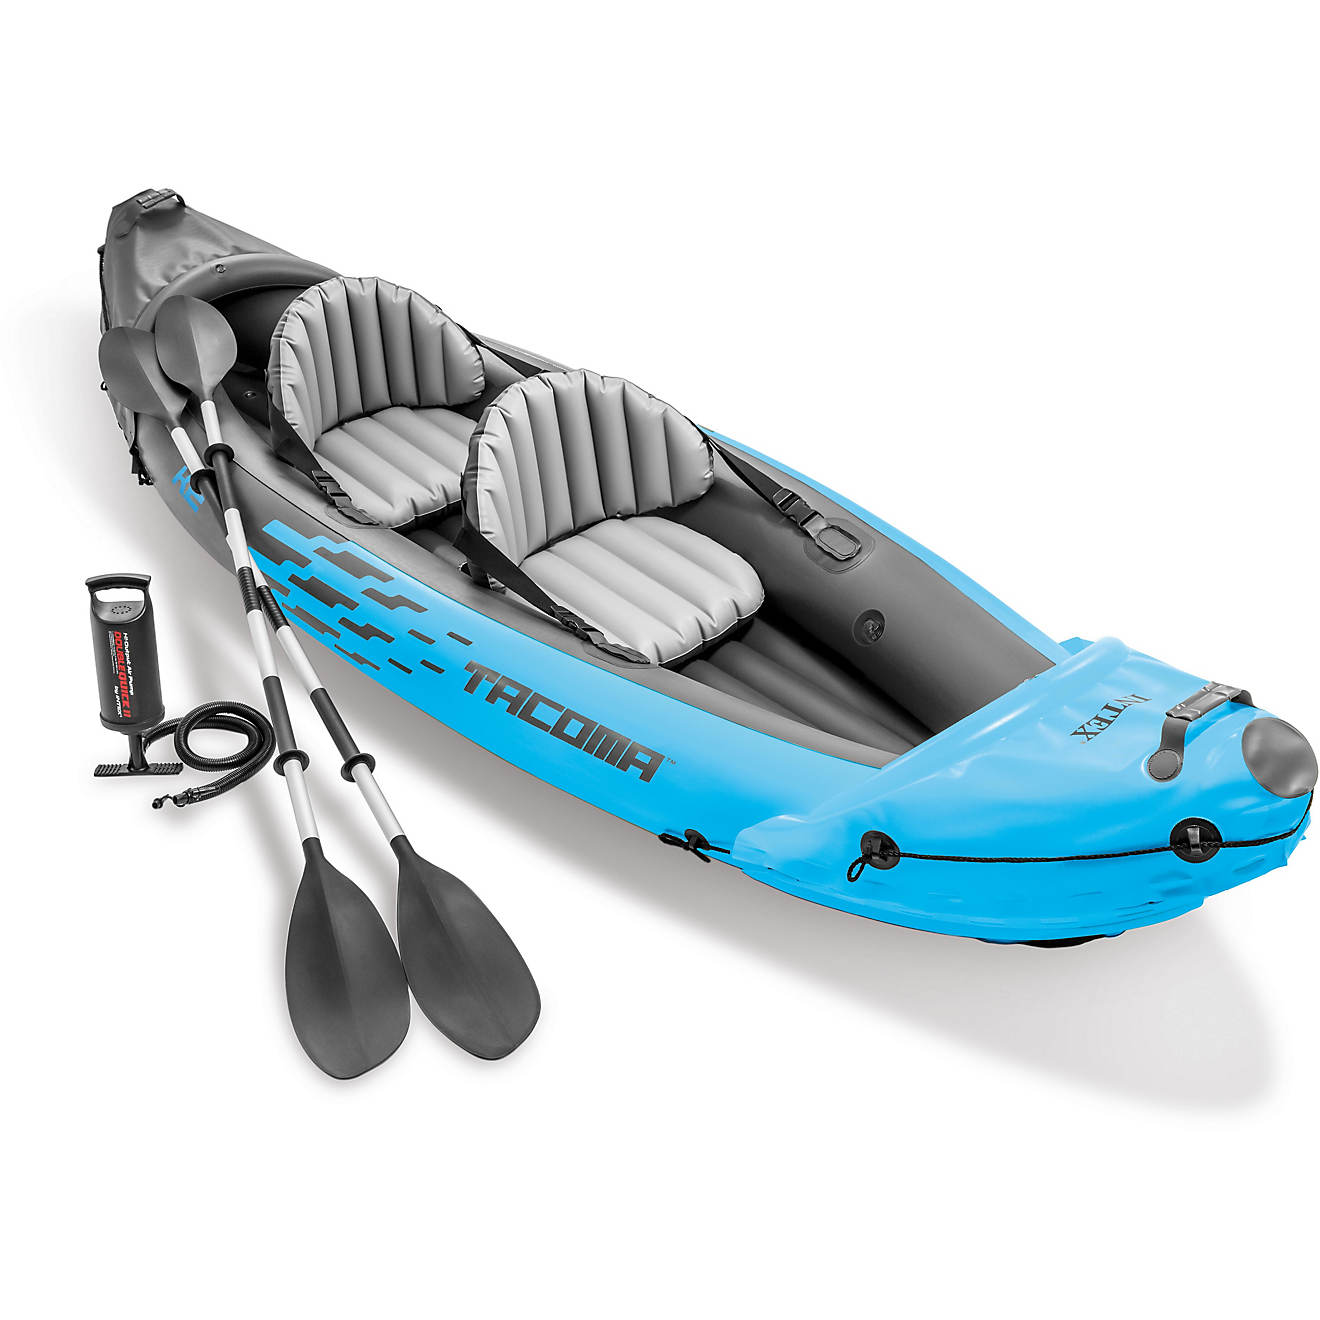 INTEX Sport Series Tacoma K2 10 ft 3 in Inflatable Kayak (Blue/Gray)